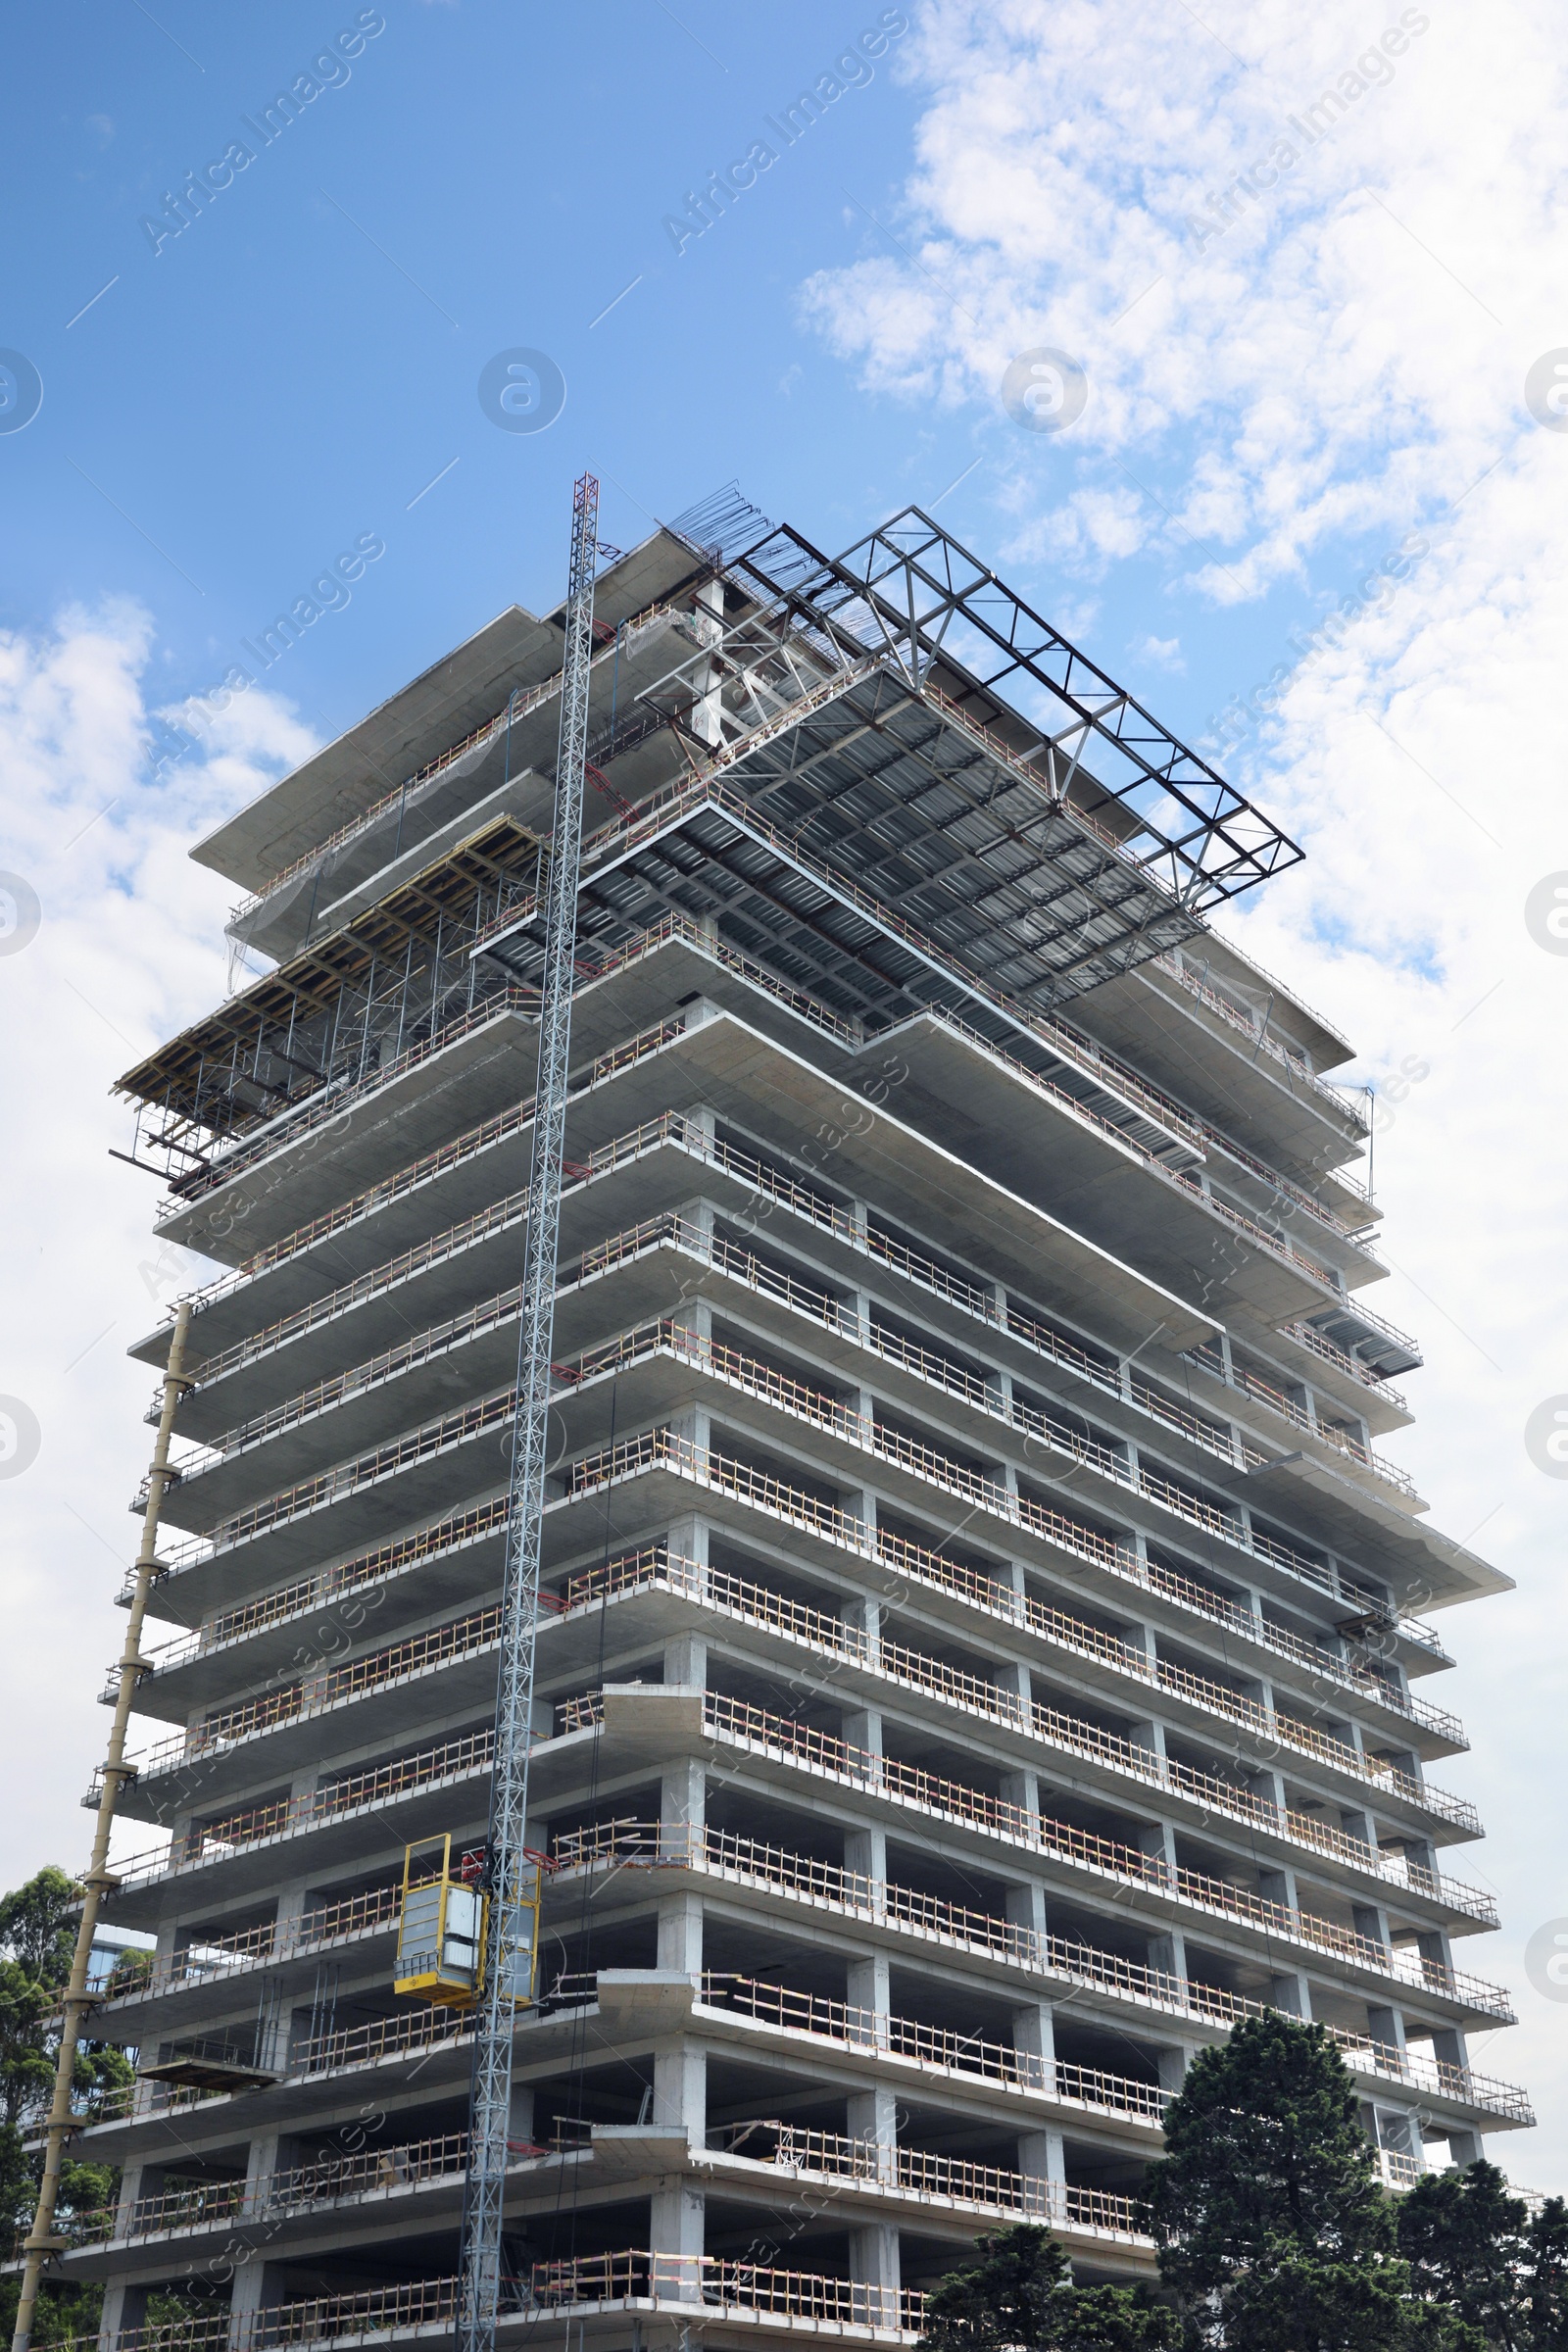 Photo of Multistory building under construction against cloudy sky, low angle view